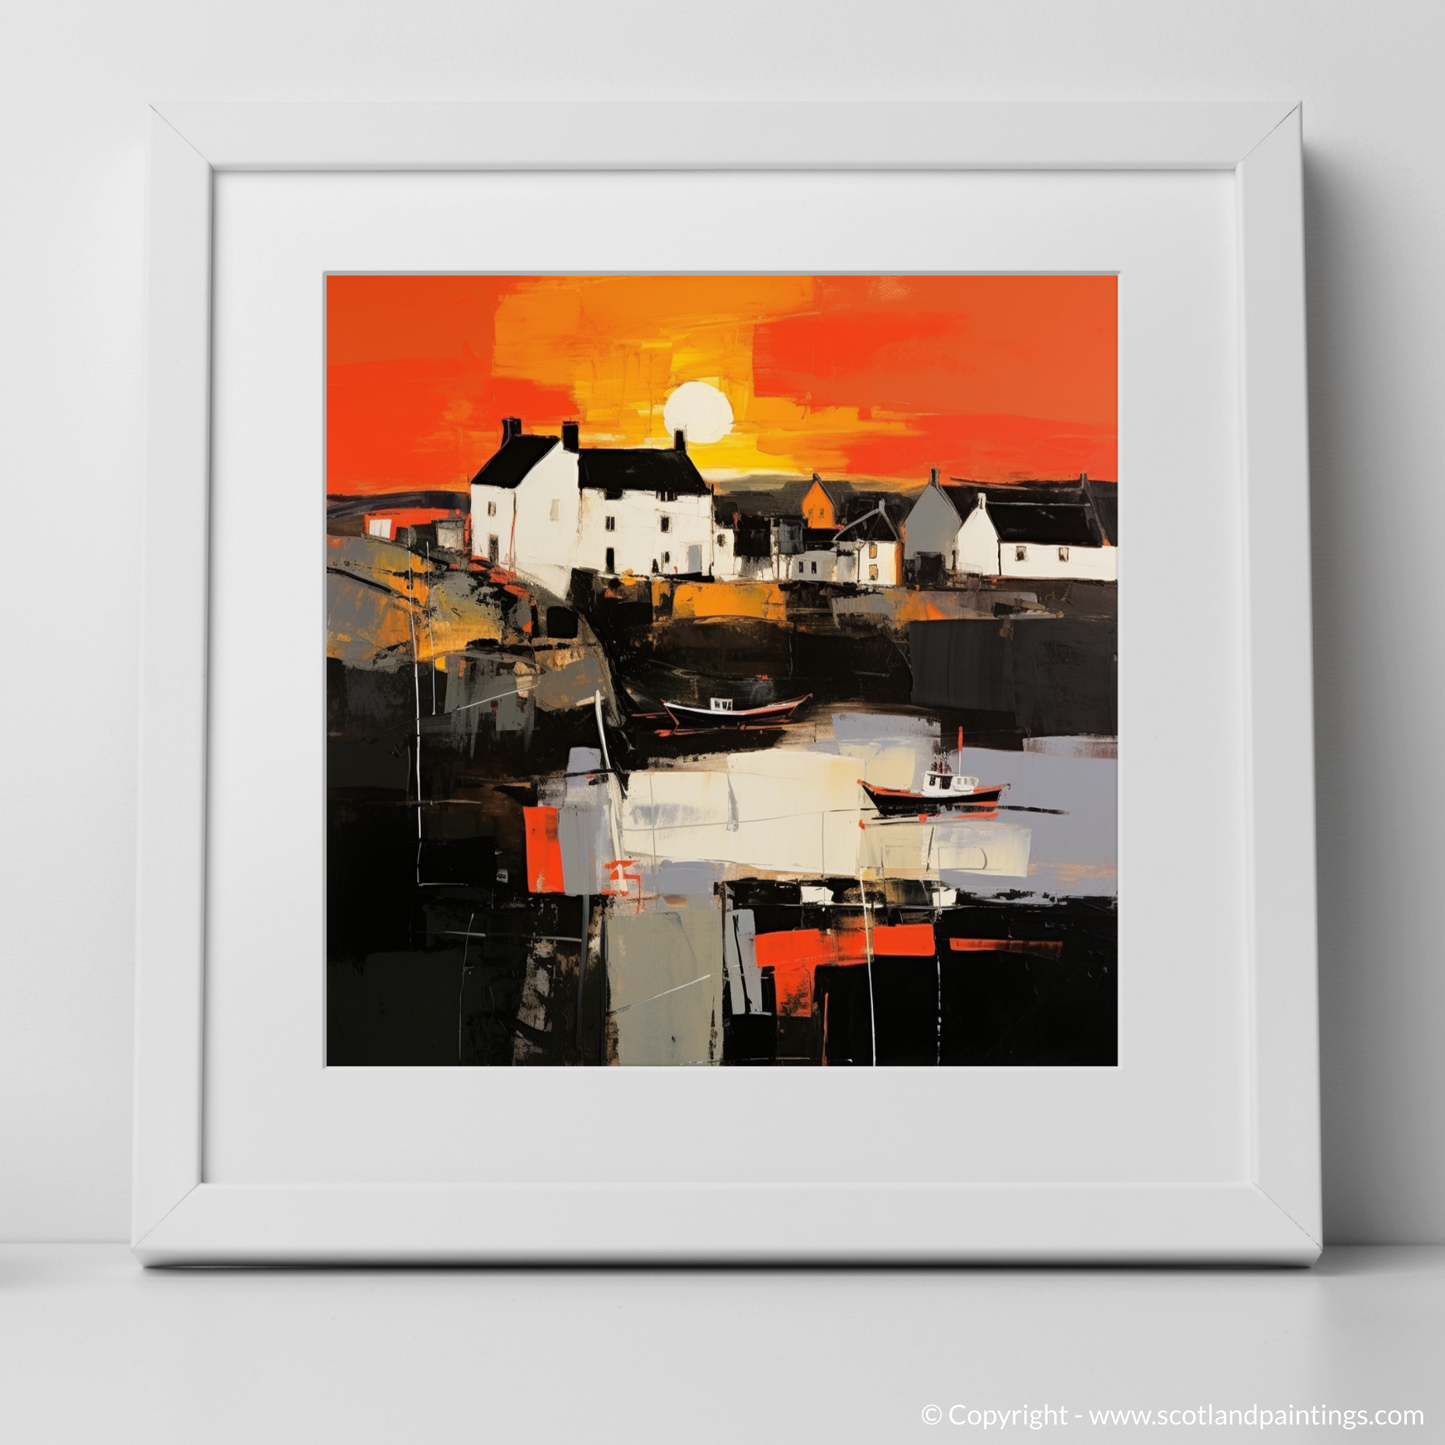 Crail Harbour at Sunset: An Abstract Scottish Coastal Masterpiece